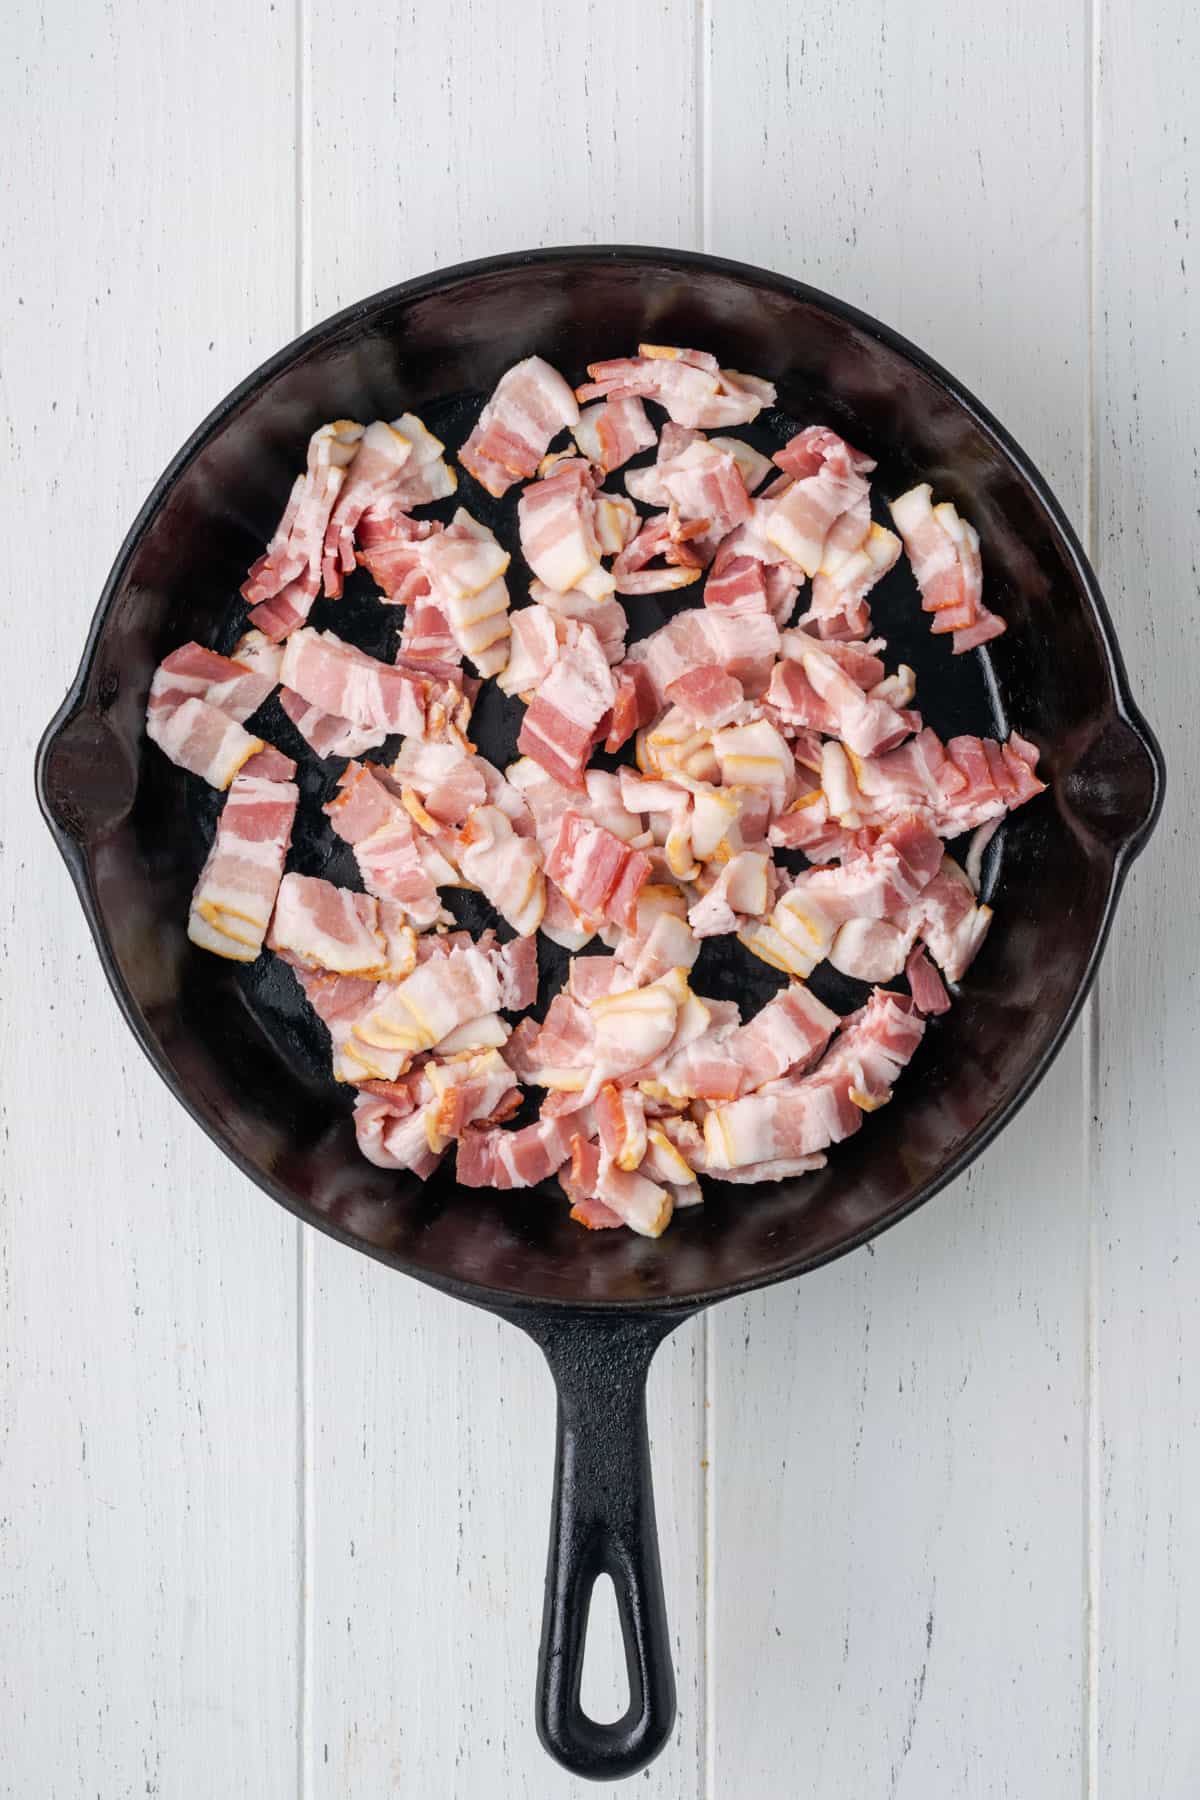 Cut pieces of bacon in a cast iron skillet.